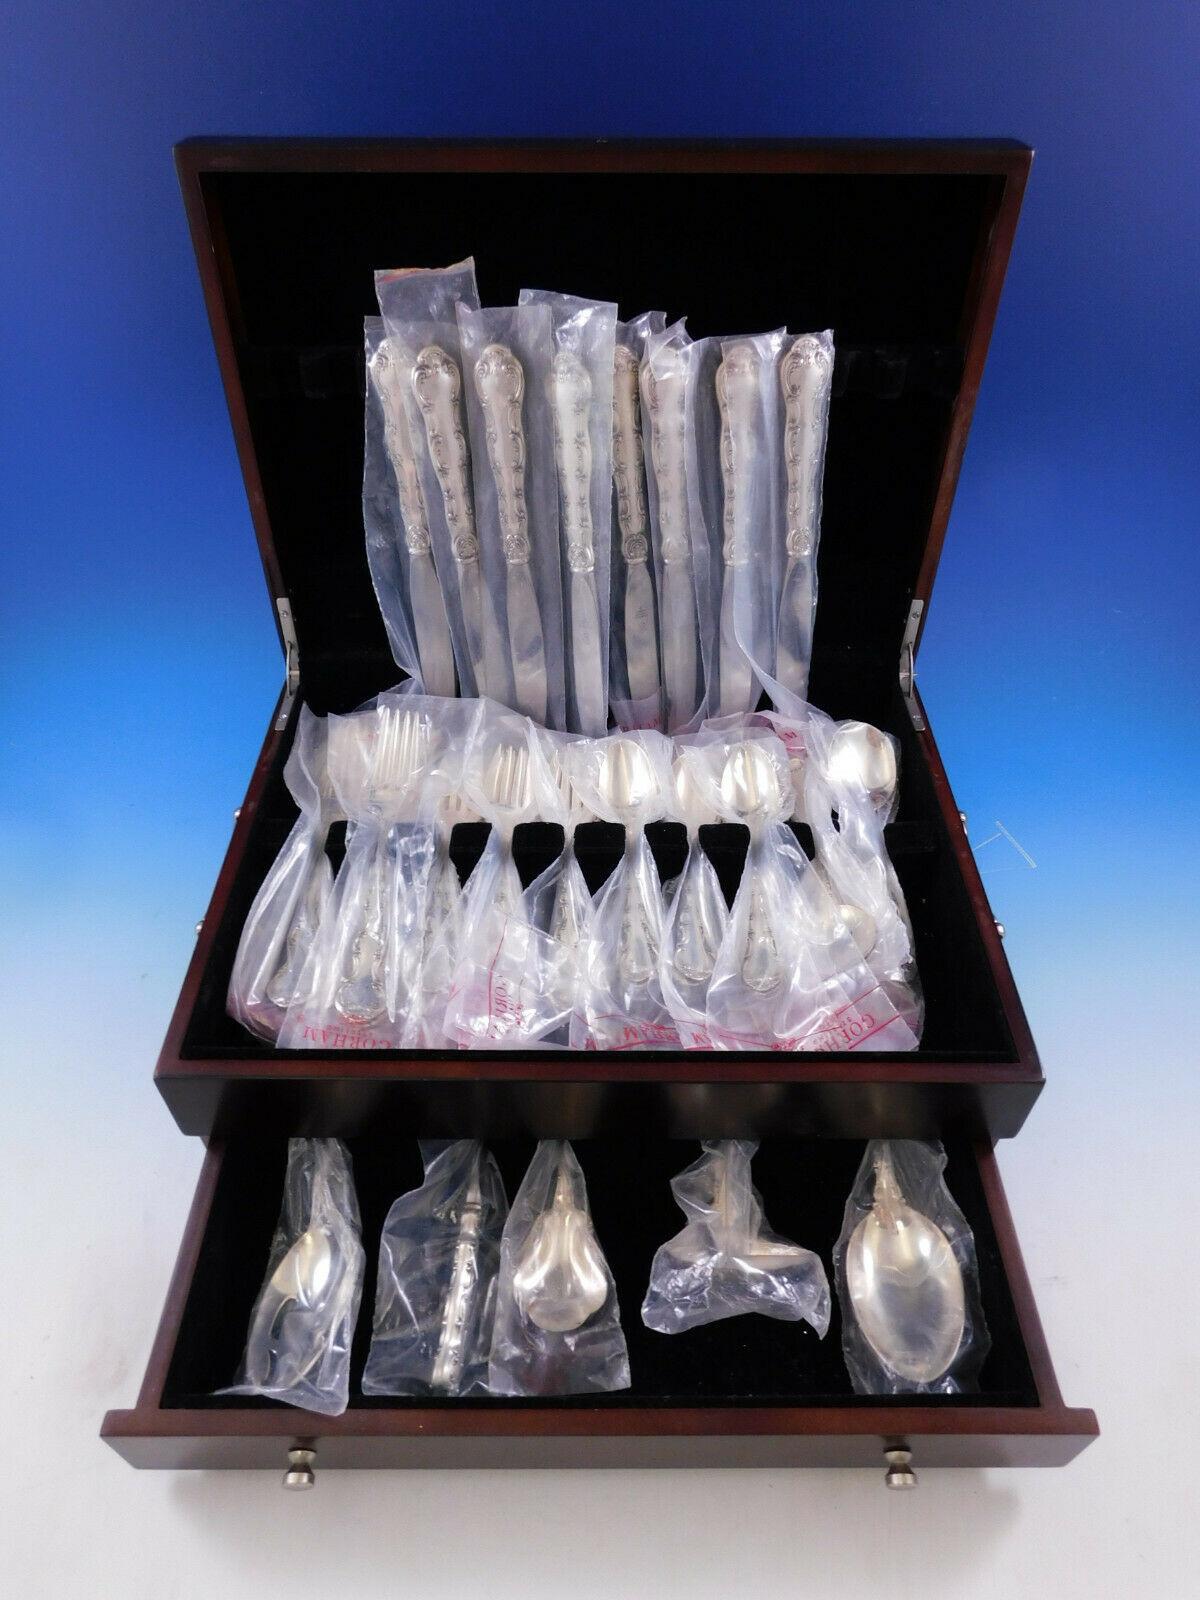 New, unused Strasbourg by Gorham sterling silver place Size flatware set - 45 pieces. This set includes:

8 place size knives, 9 1/4